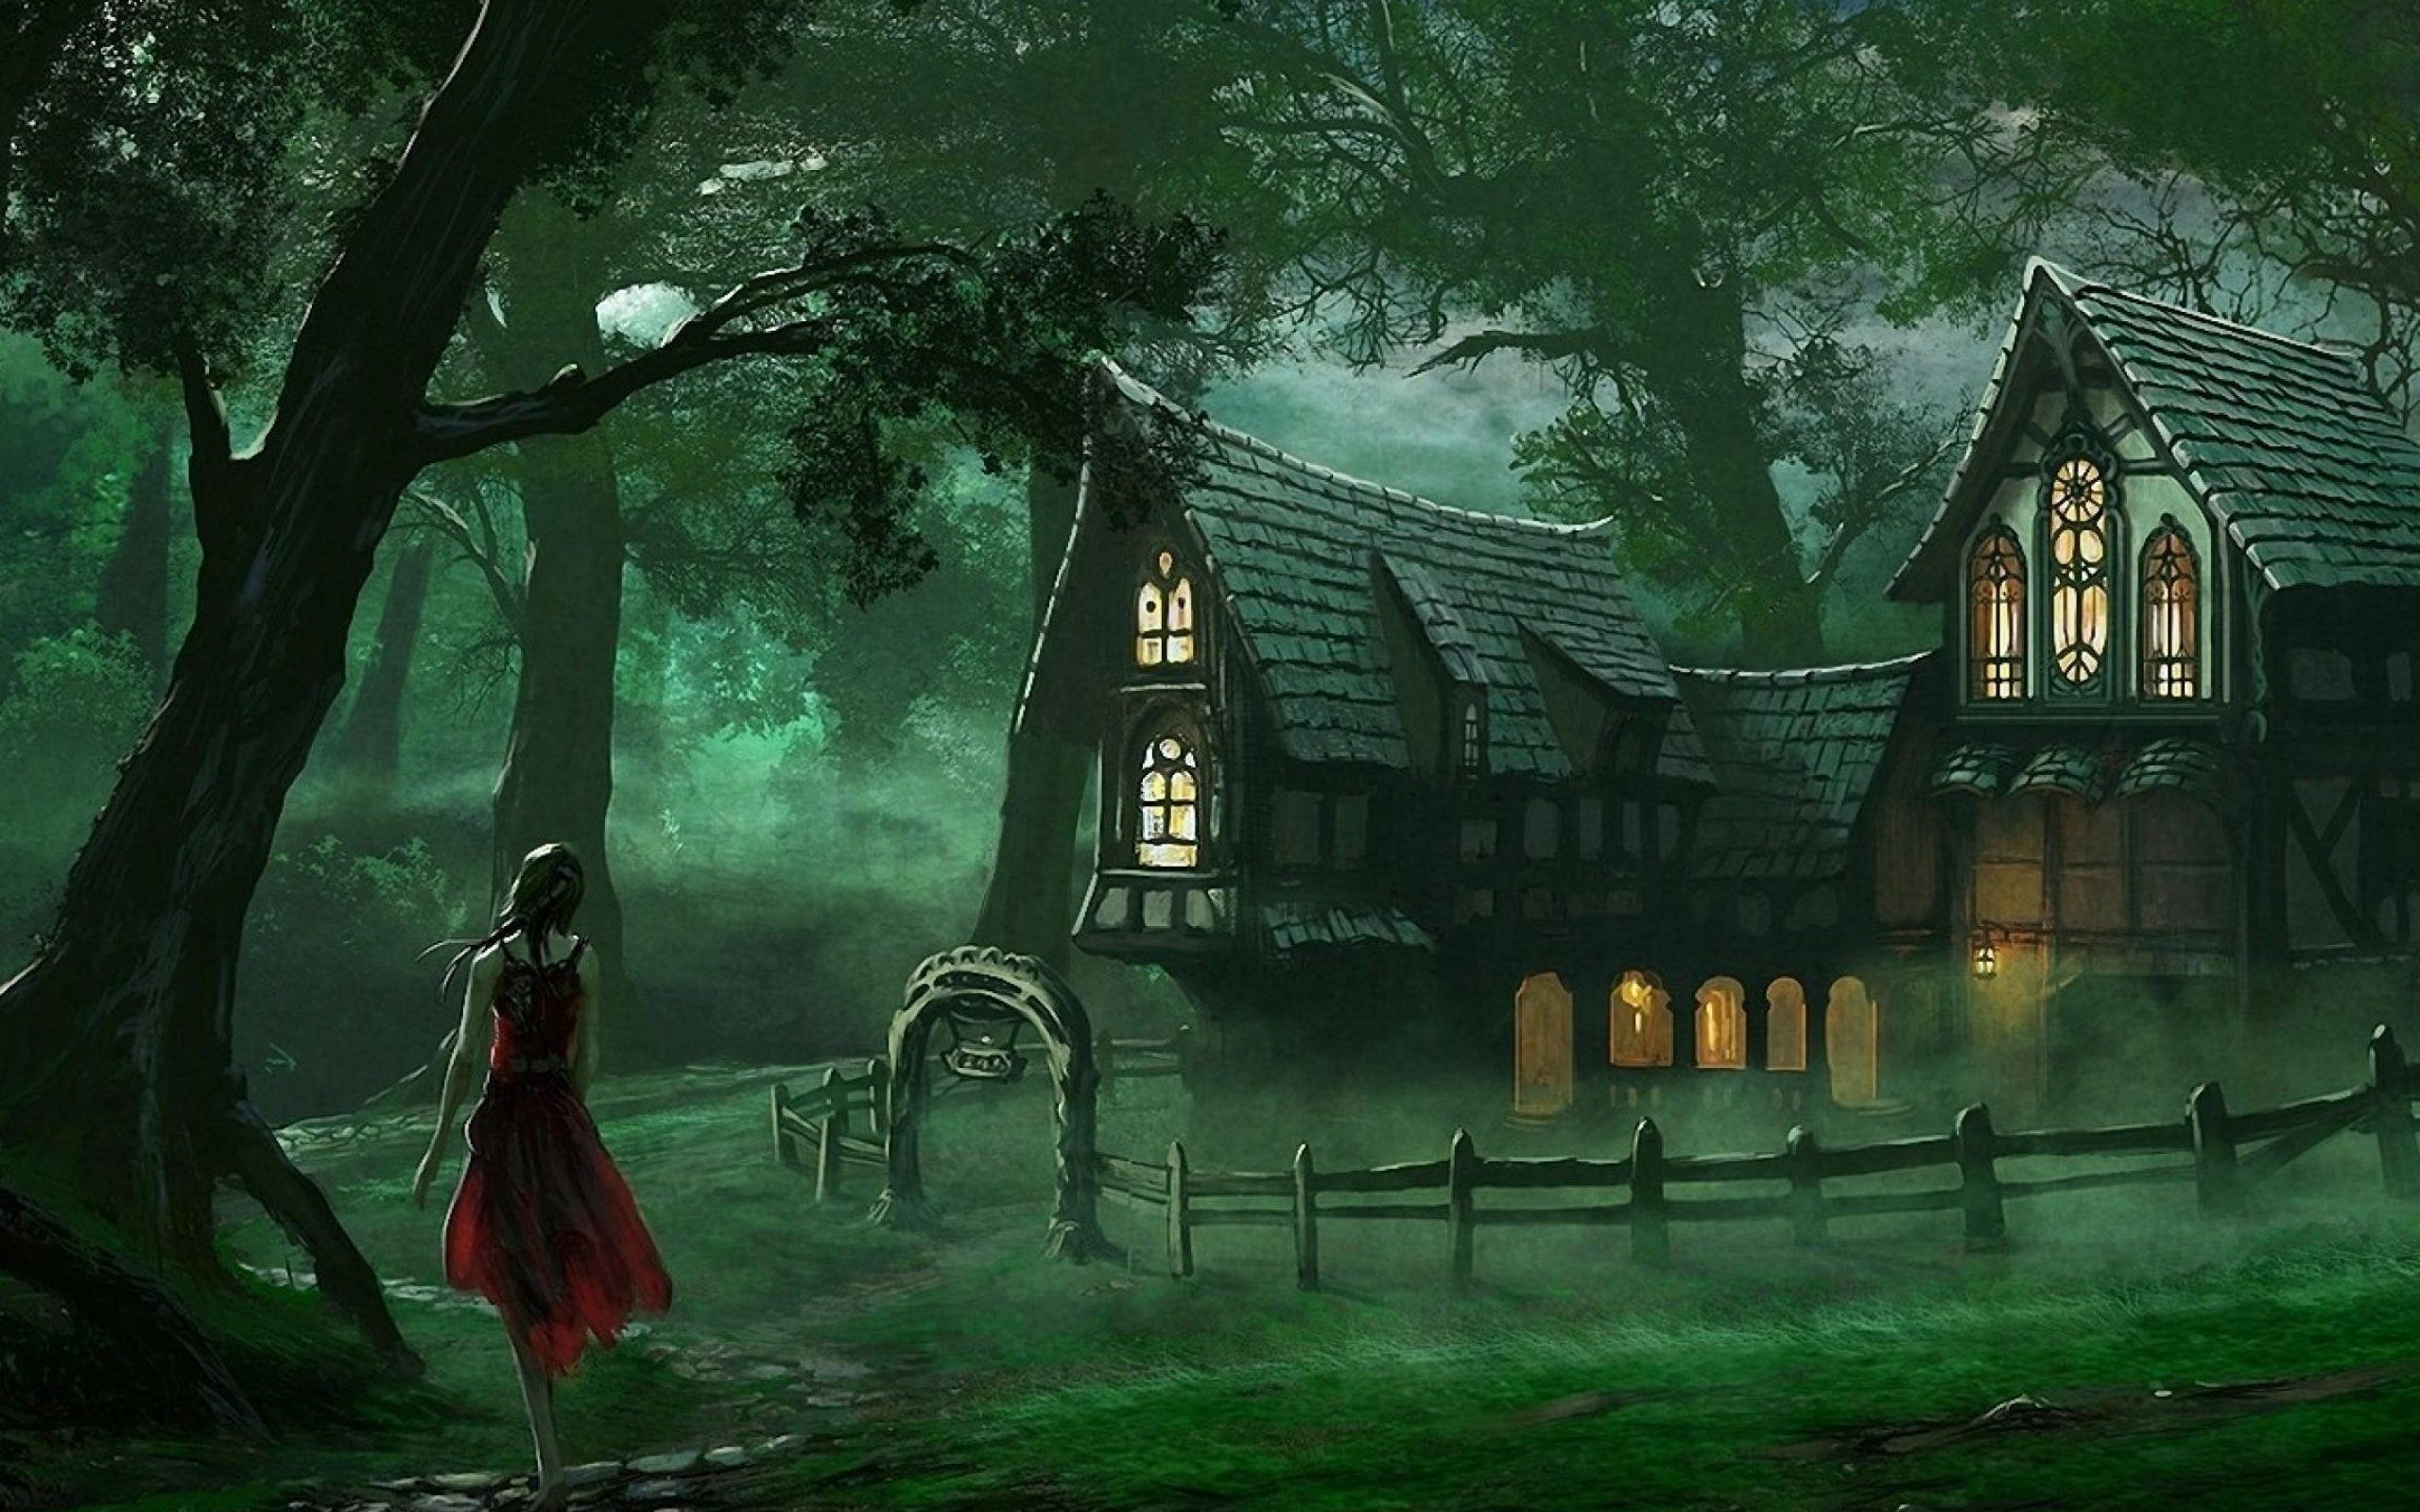 Spooky House Fantasy Forest Wallpaper HD Download